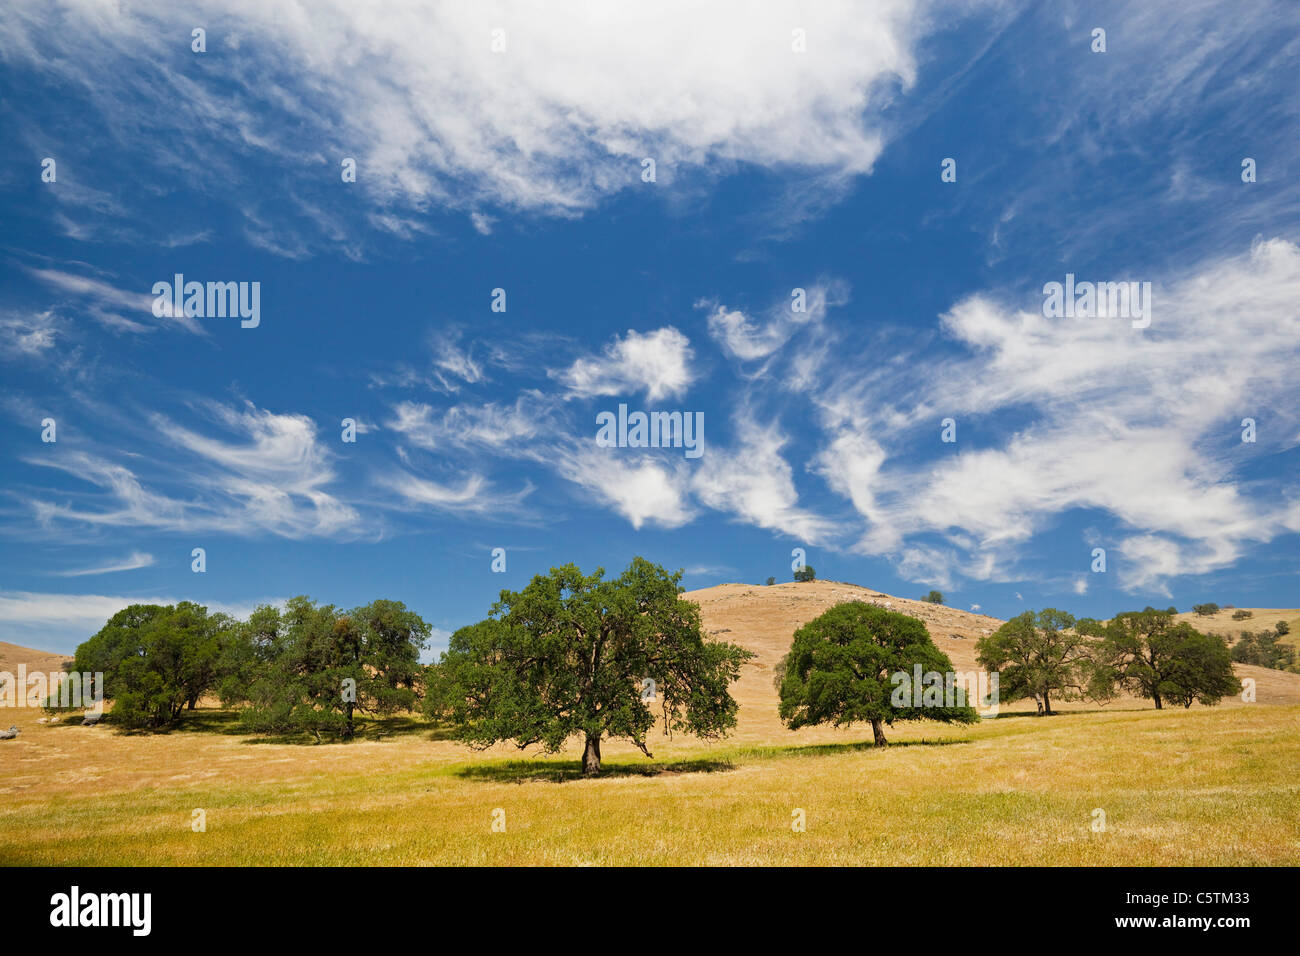 USA, California, Broad-leafed trees in hilly landscape Stock Photo